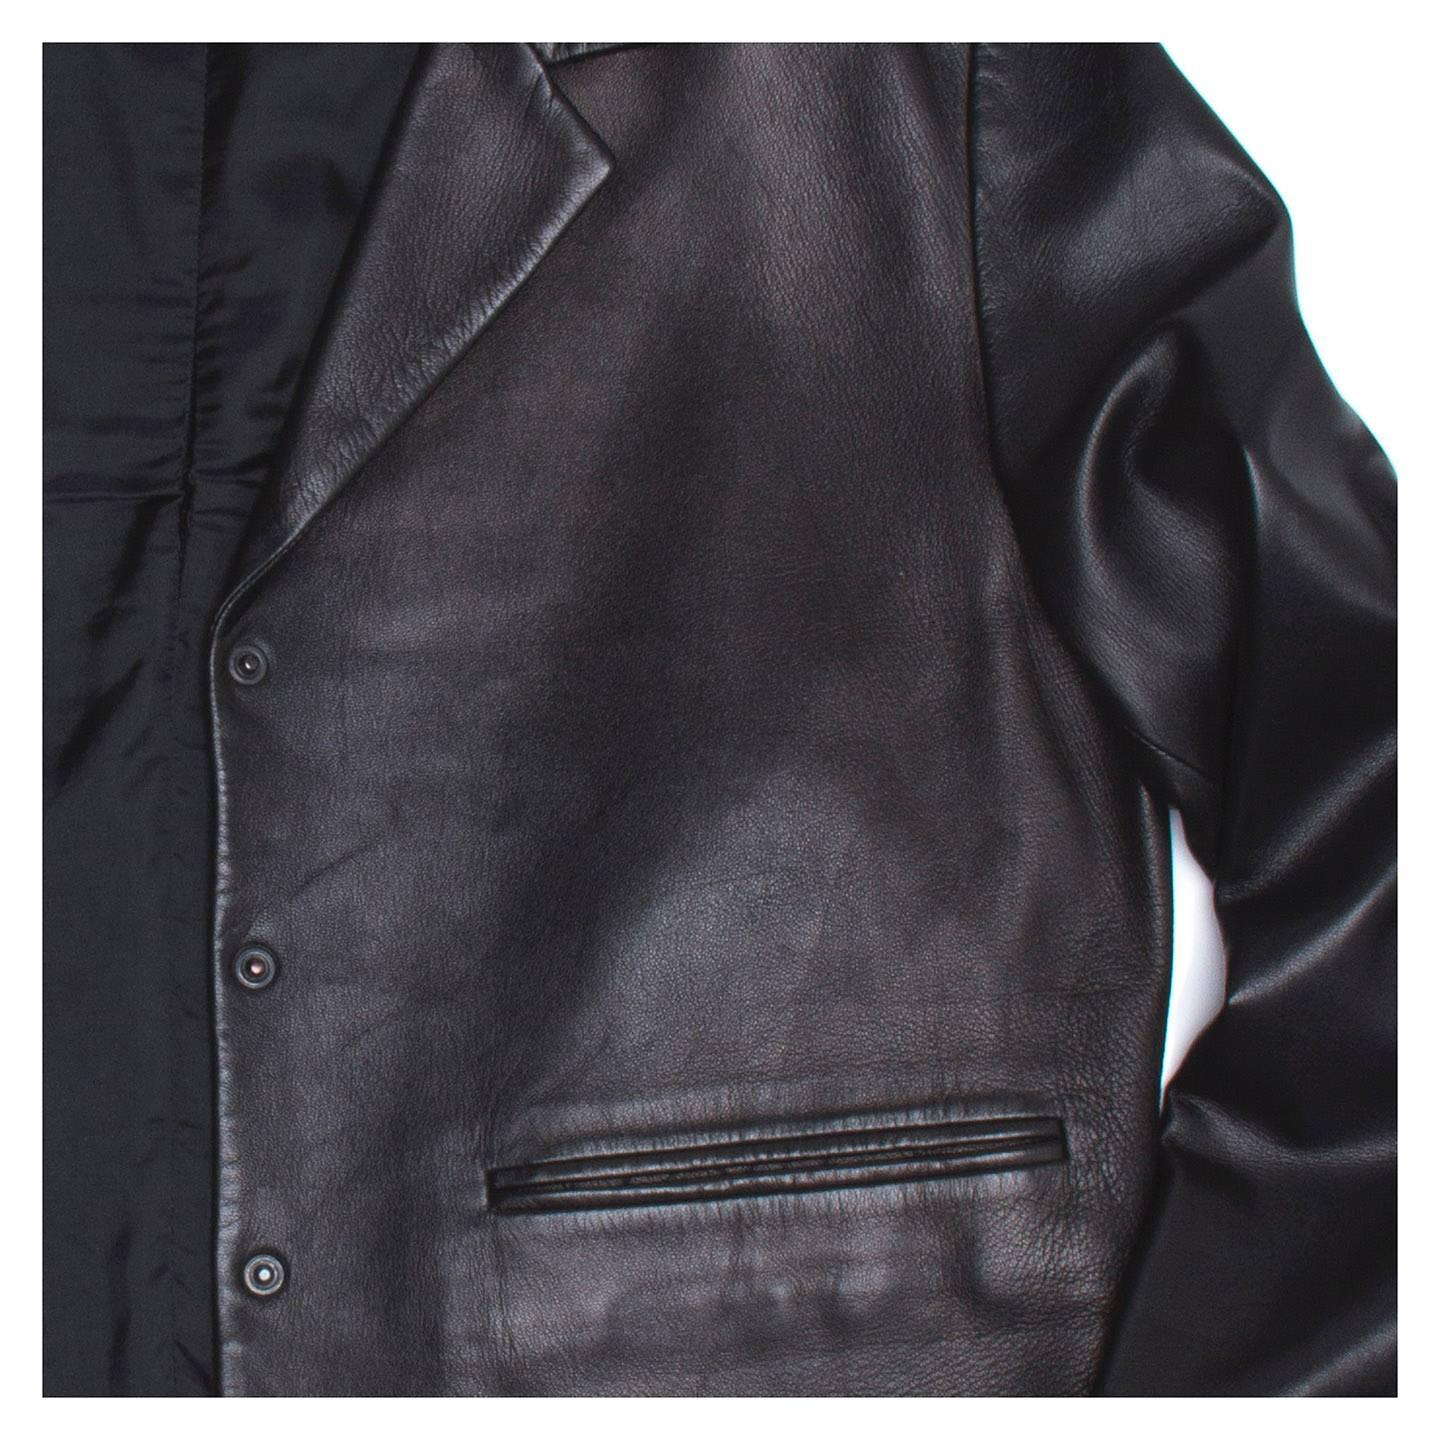 Prada Black Nappa Leather Jacket In Good Condition For Sale In Brooklyn, NY